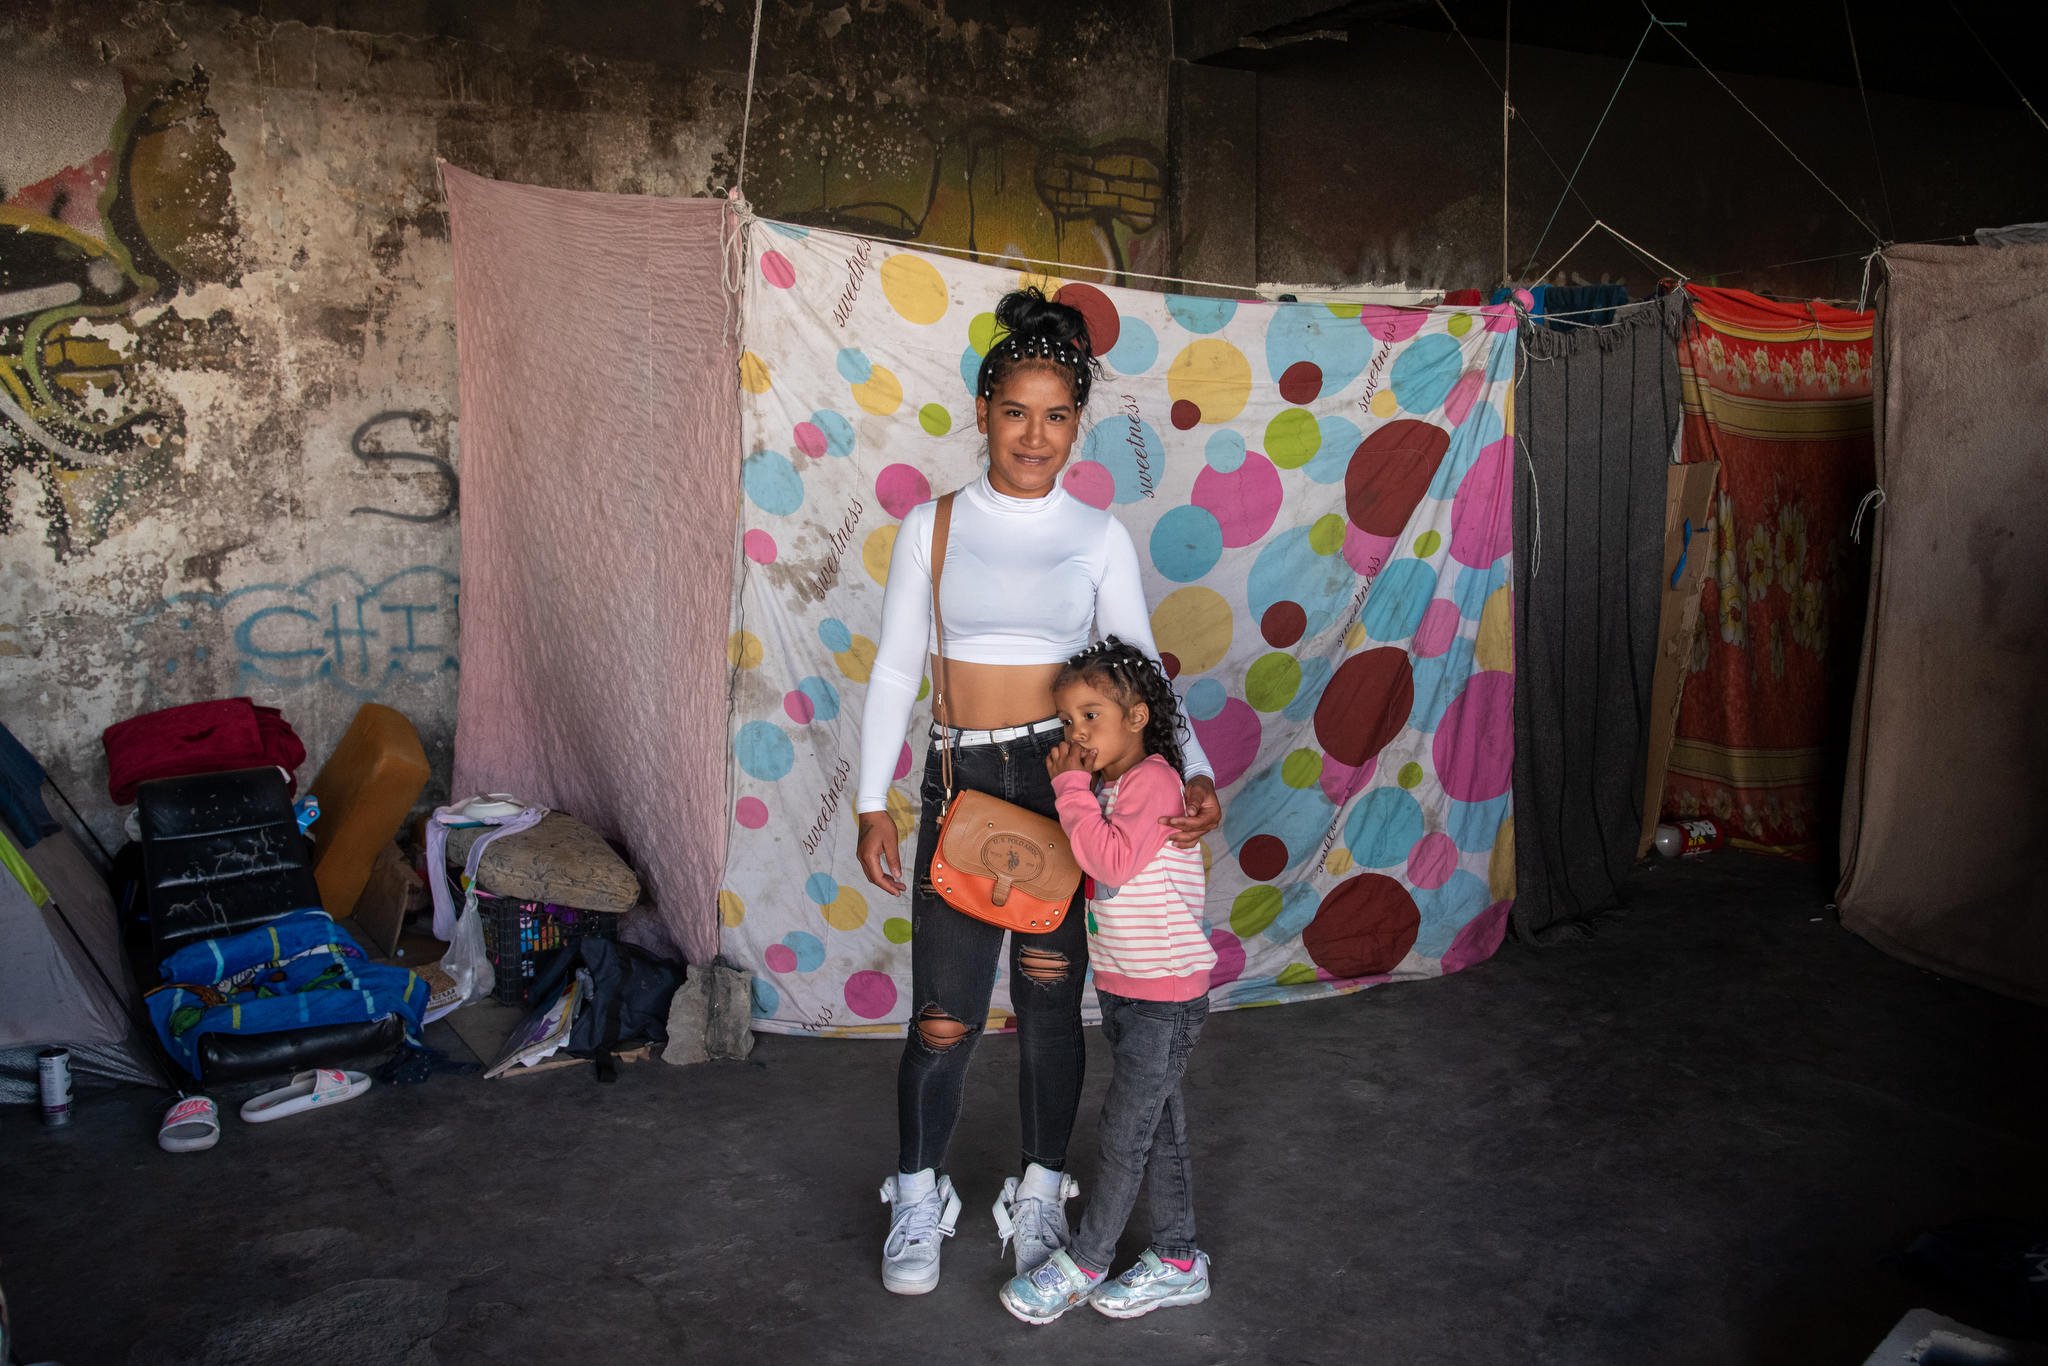 A Latinx mother and her waist-high daughter stand embracing by their home, a cement, graffiti covered ruin separated into makeshift shelters using hanging fabric.